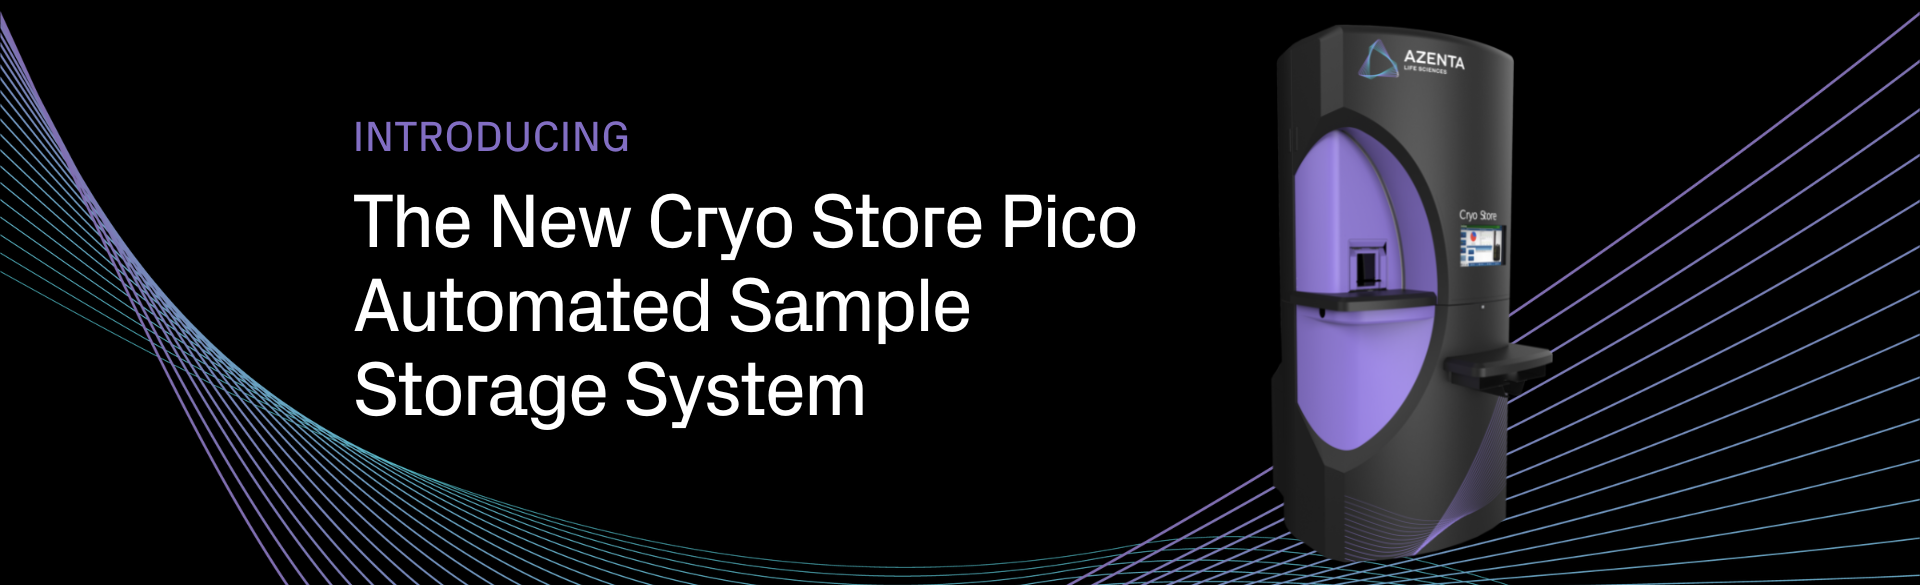 Introducing Cryo Store Pico Automated Sample Storage System